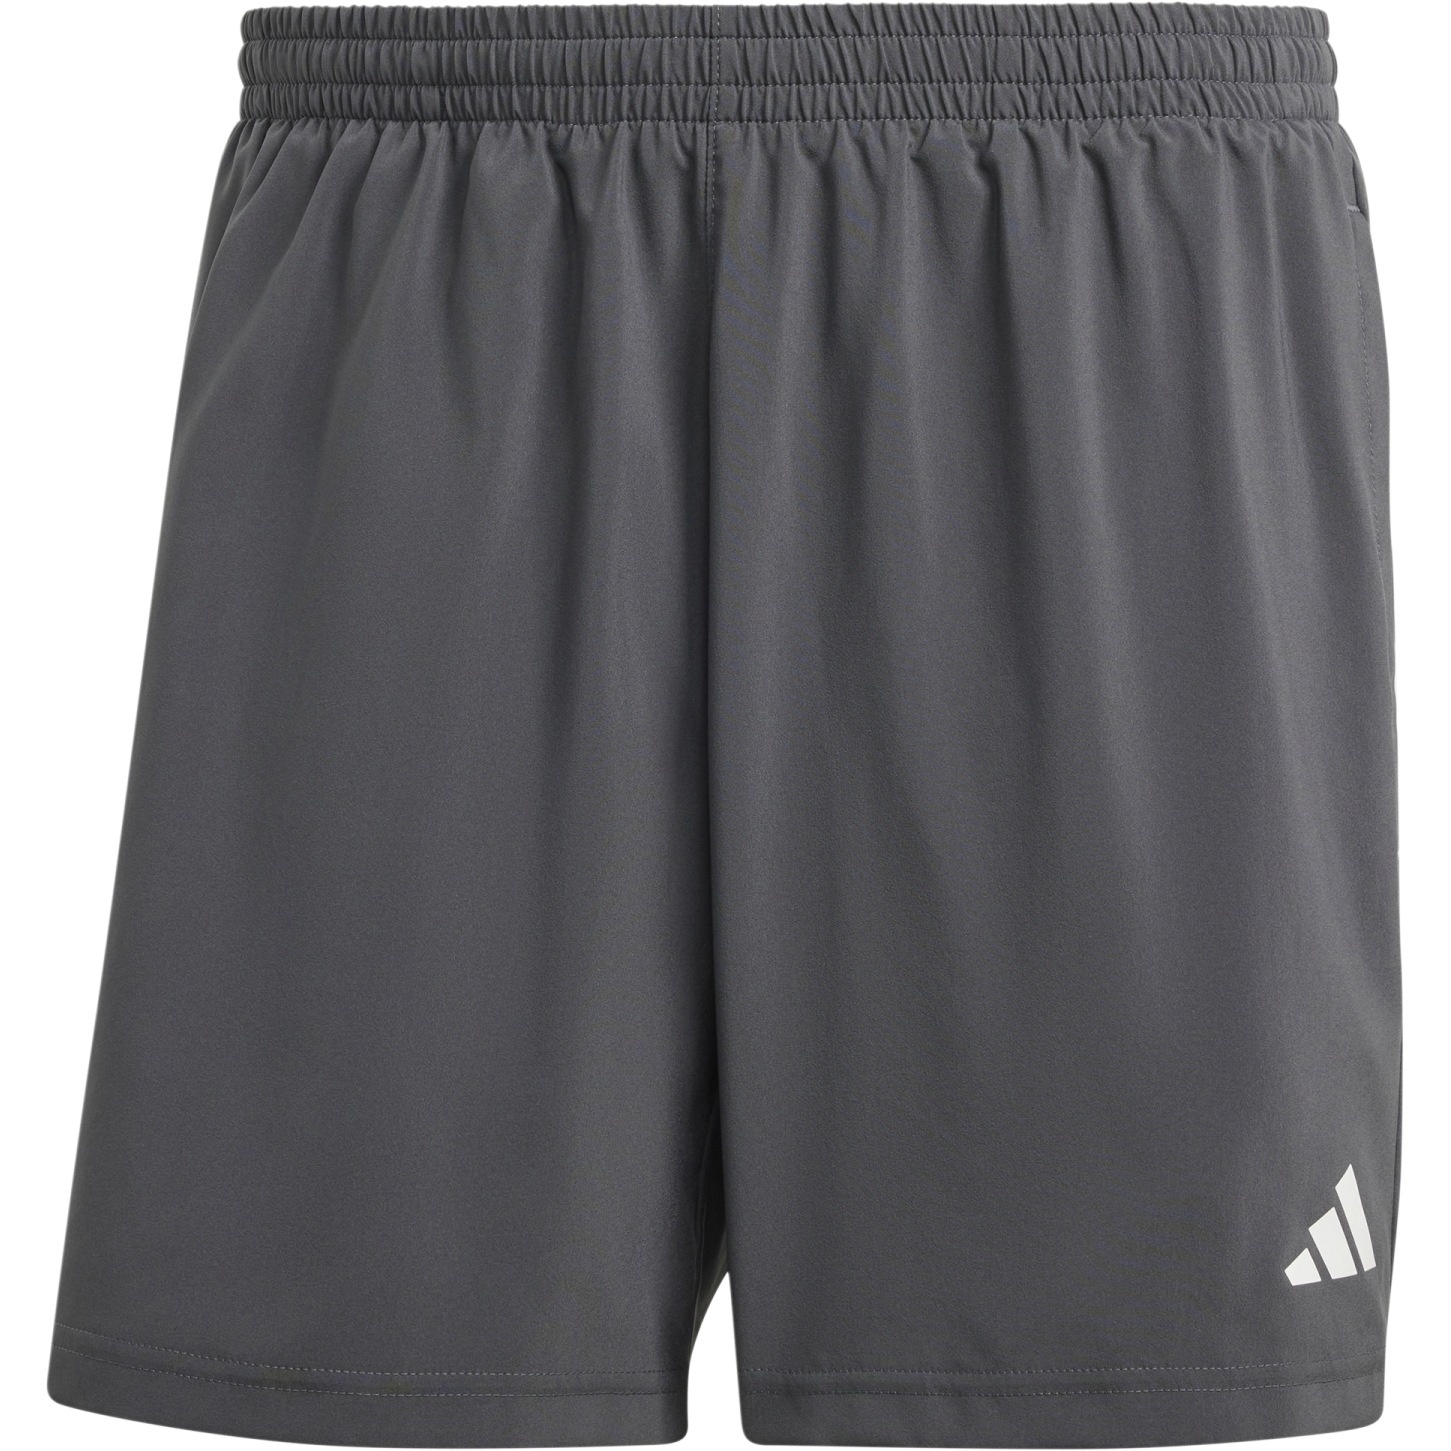 Picture of adidas Own the Run Shorts Men - grey six IY0716